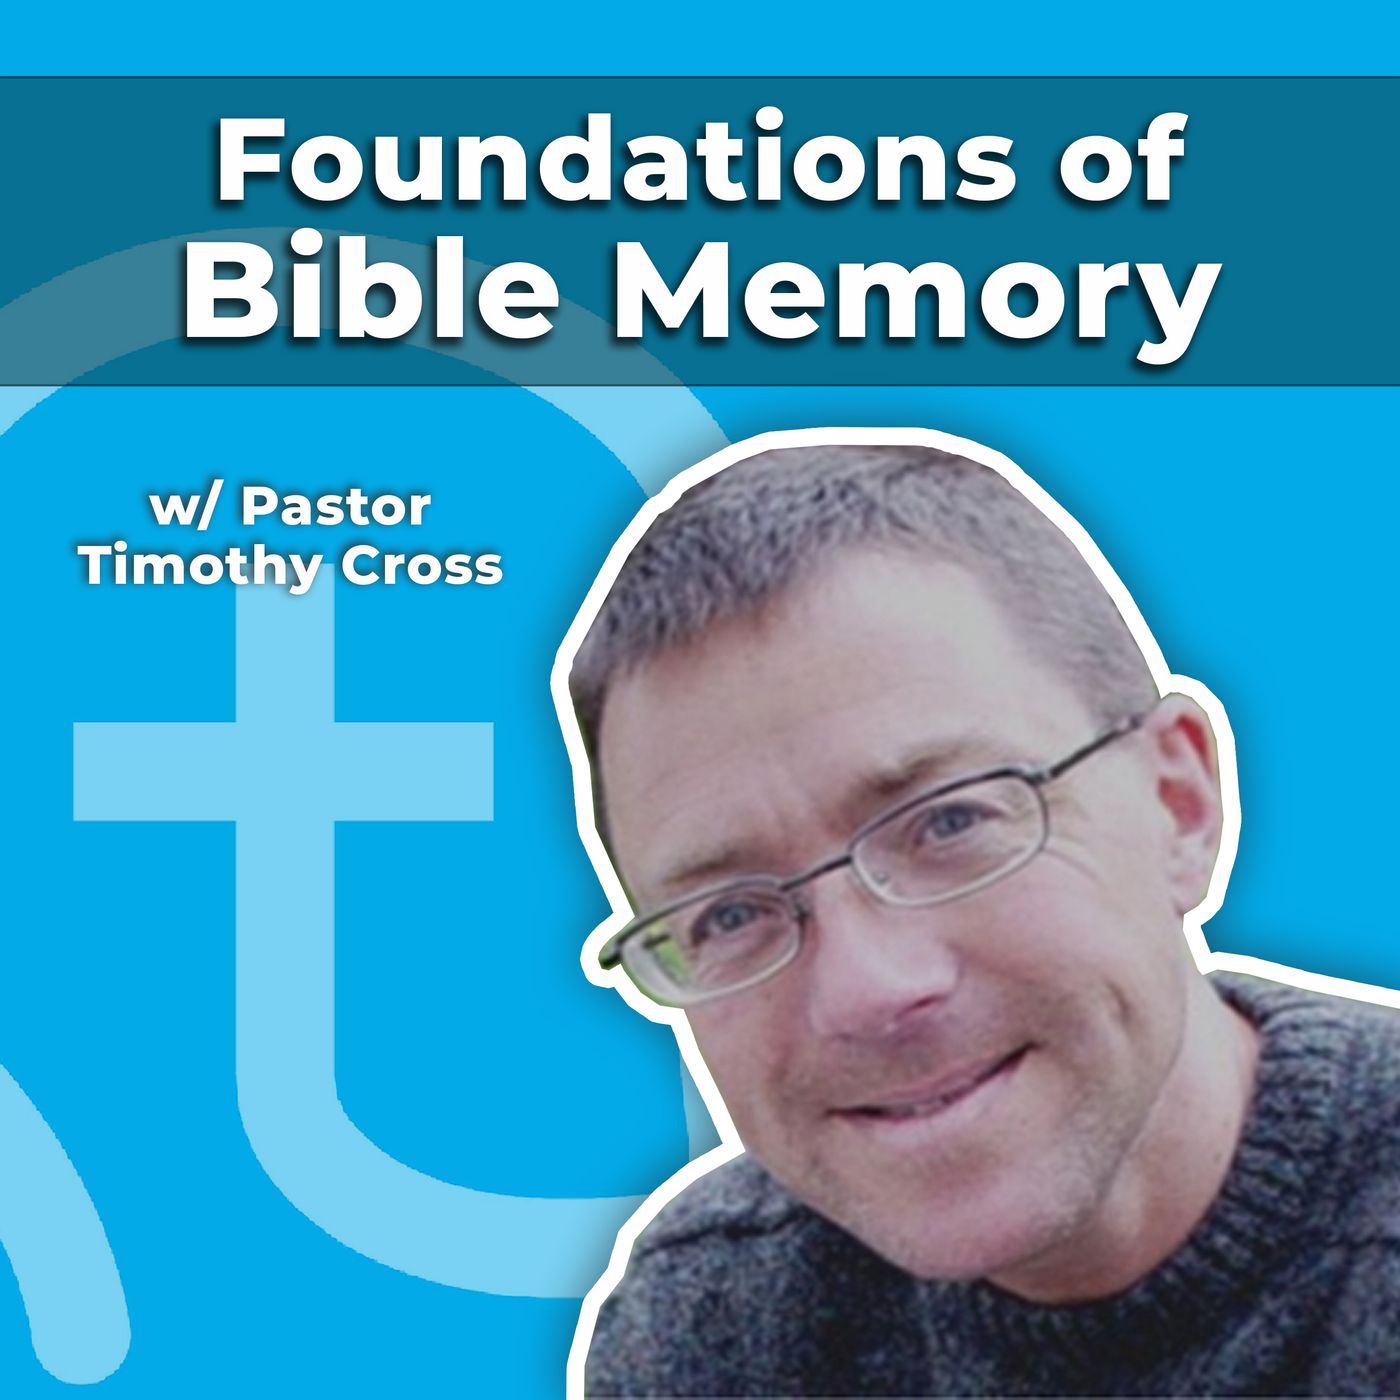 ”First, Build a Foundation of Biblical Theology...” (w/ Dr. Timothy Cross)